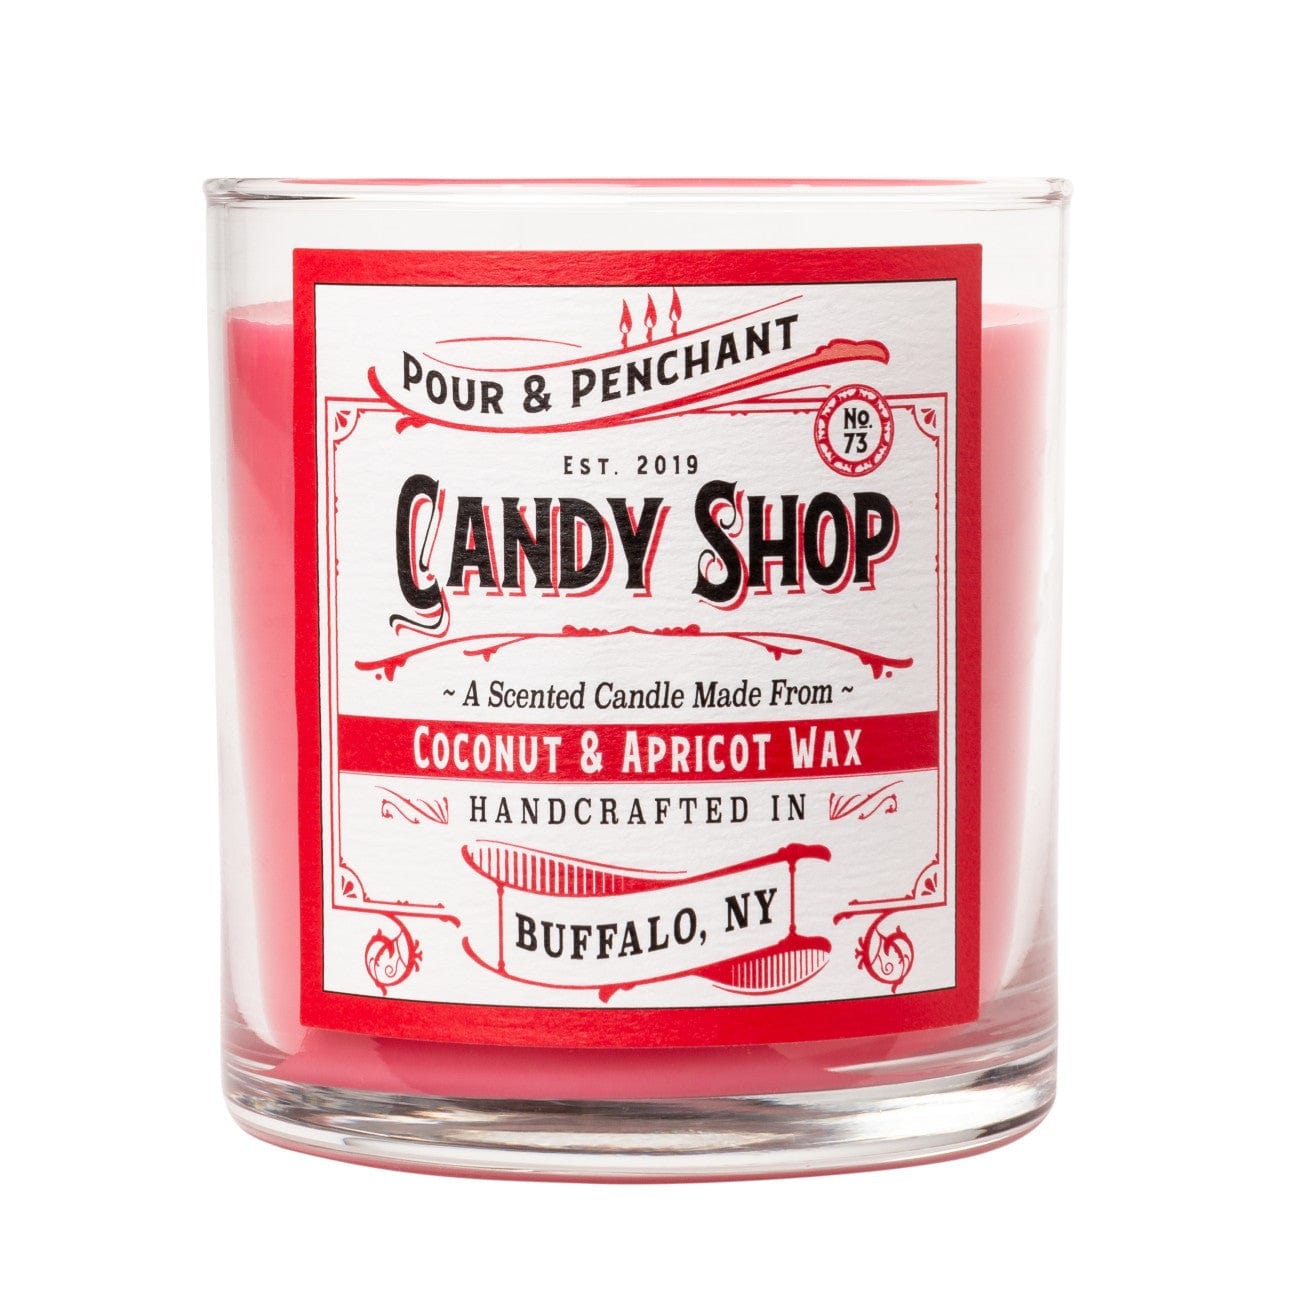 Pour & Penchant 10 oz Scented Candle - CANDY SHOP no.73 - Black Currant, Raspberry, Freesia & Tonka